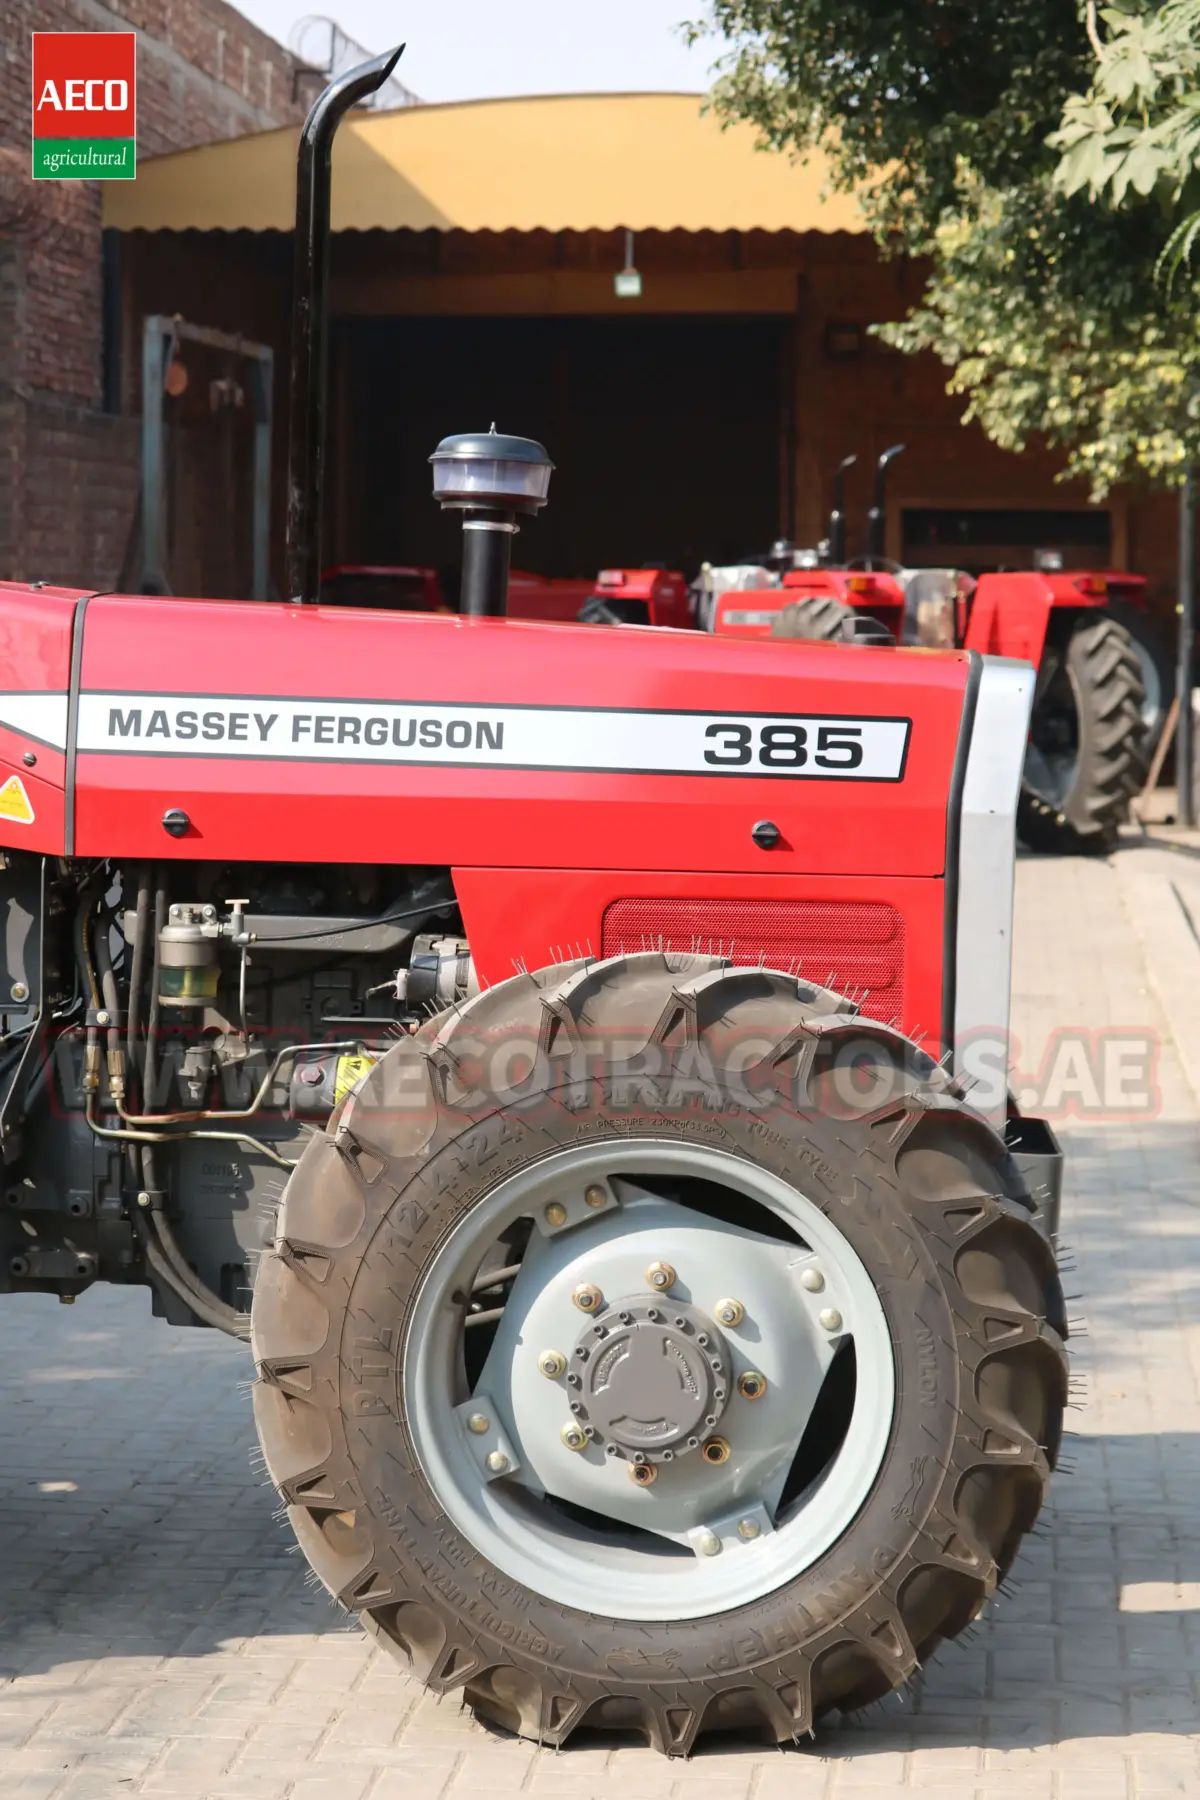 Front view of Massey Ferguson 385 tractor for sale